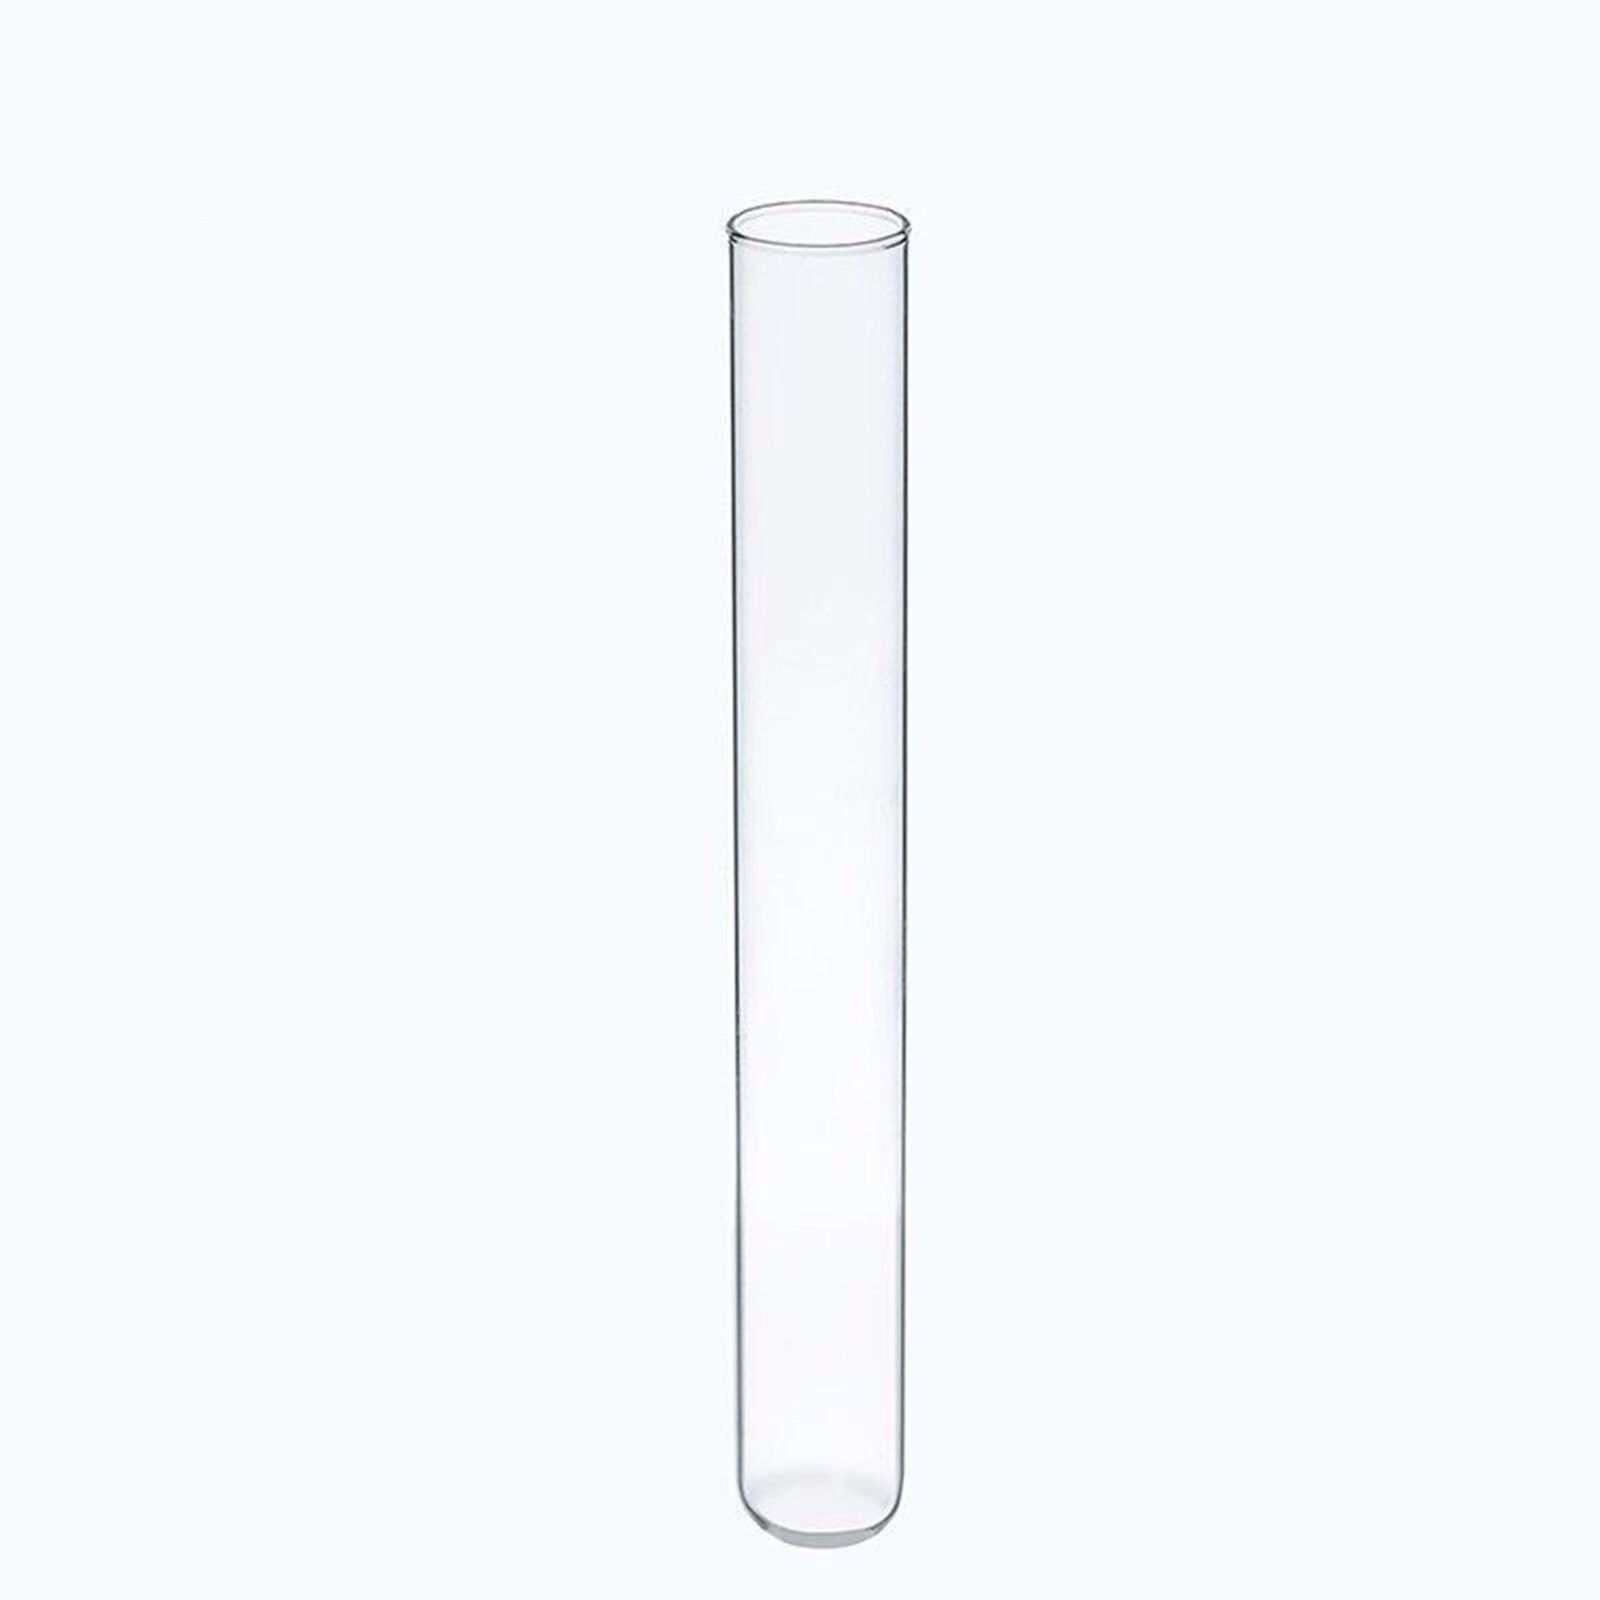 13 Wonderful Glass Test Tube Vases 2024 free download glass test tube vases of aliexpress com buy 10 counts 30x200mmlab glass test tubeod 30mm with regard to aliexpress com buy 10 counts 30x200mmlab glass test tubeod 30mmlength 200mm120ml from 